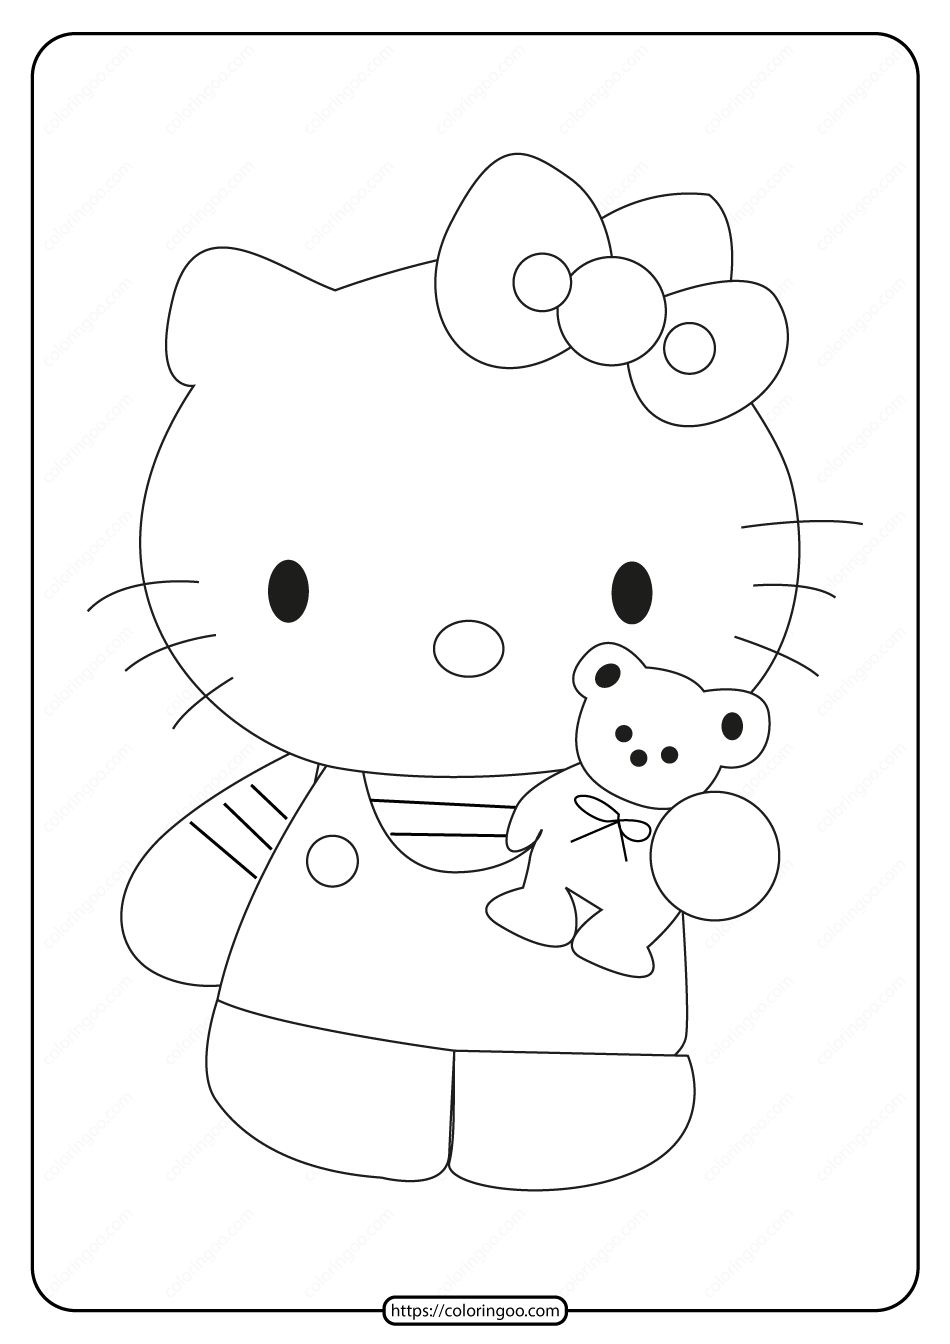 Printable Hello Kitty with a TeddyBear Coloring Page